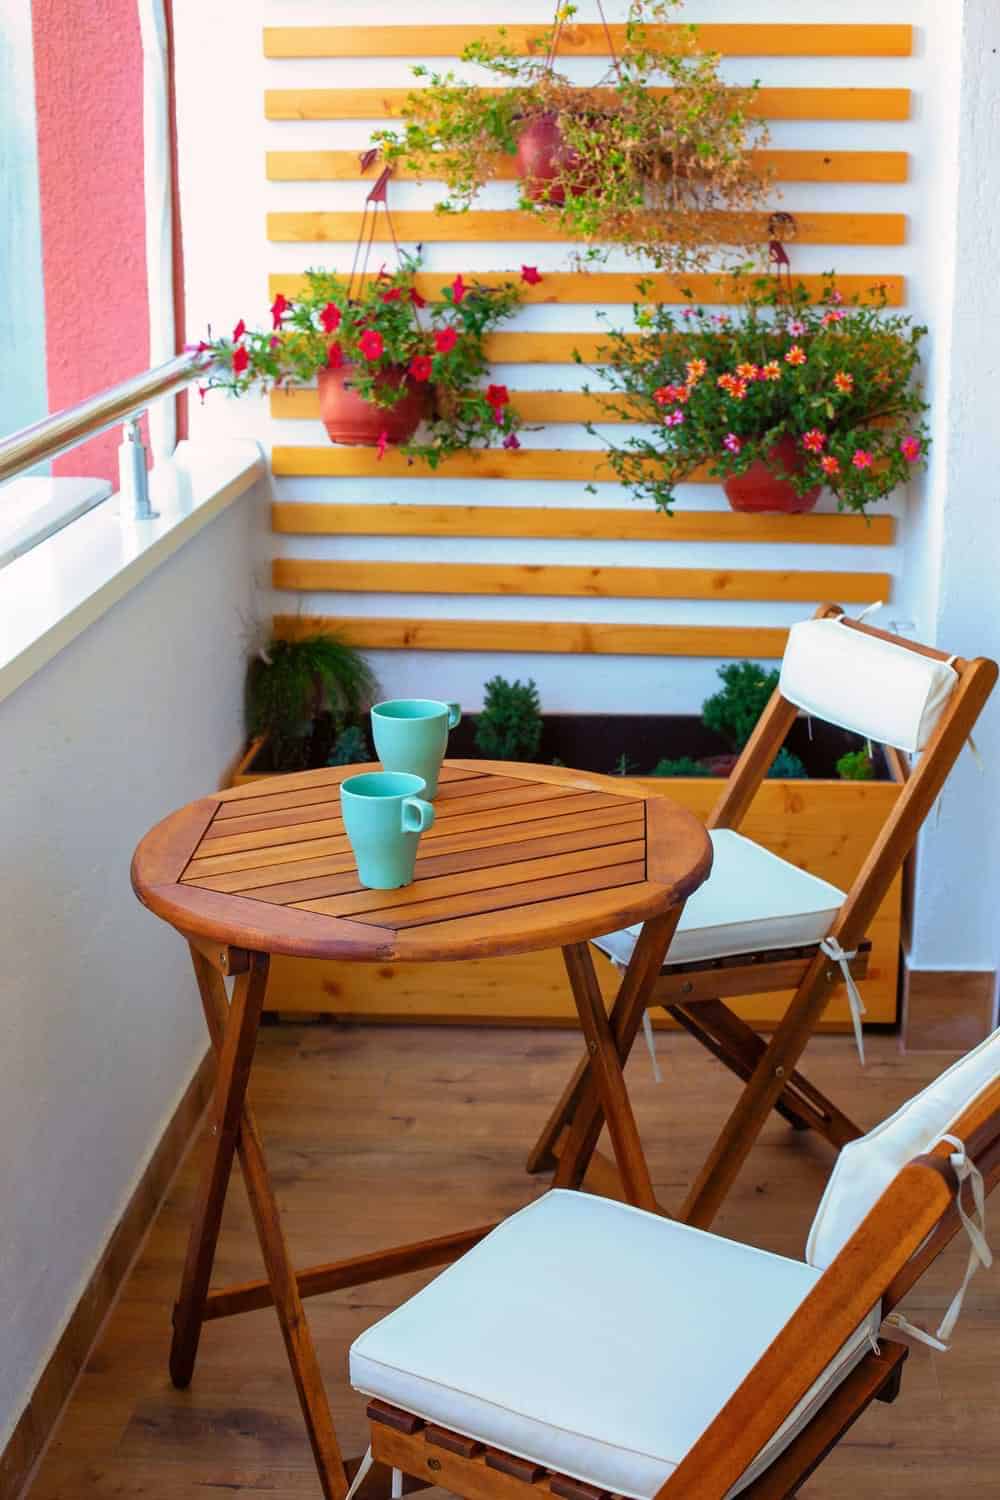 Brown wooden floor balcony with chairs and table